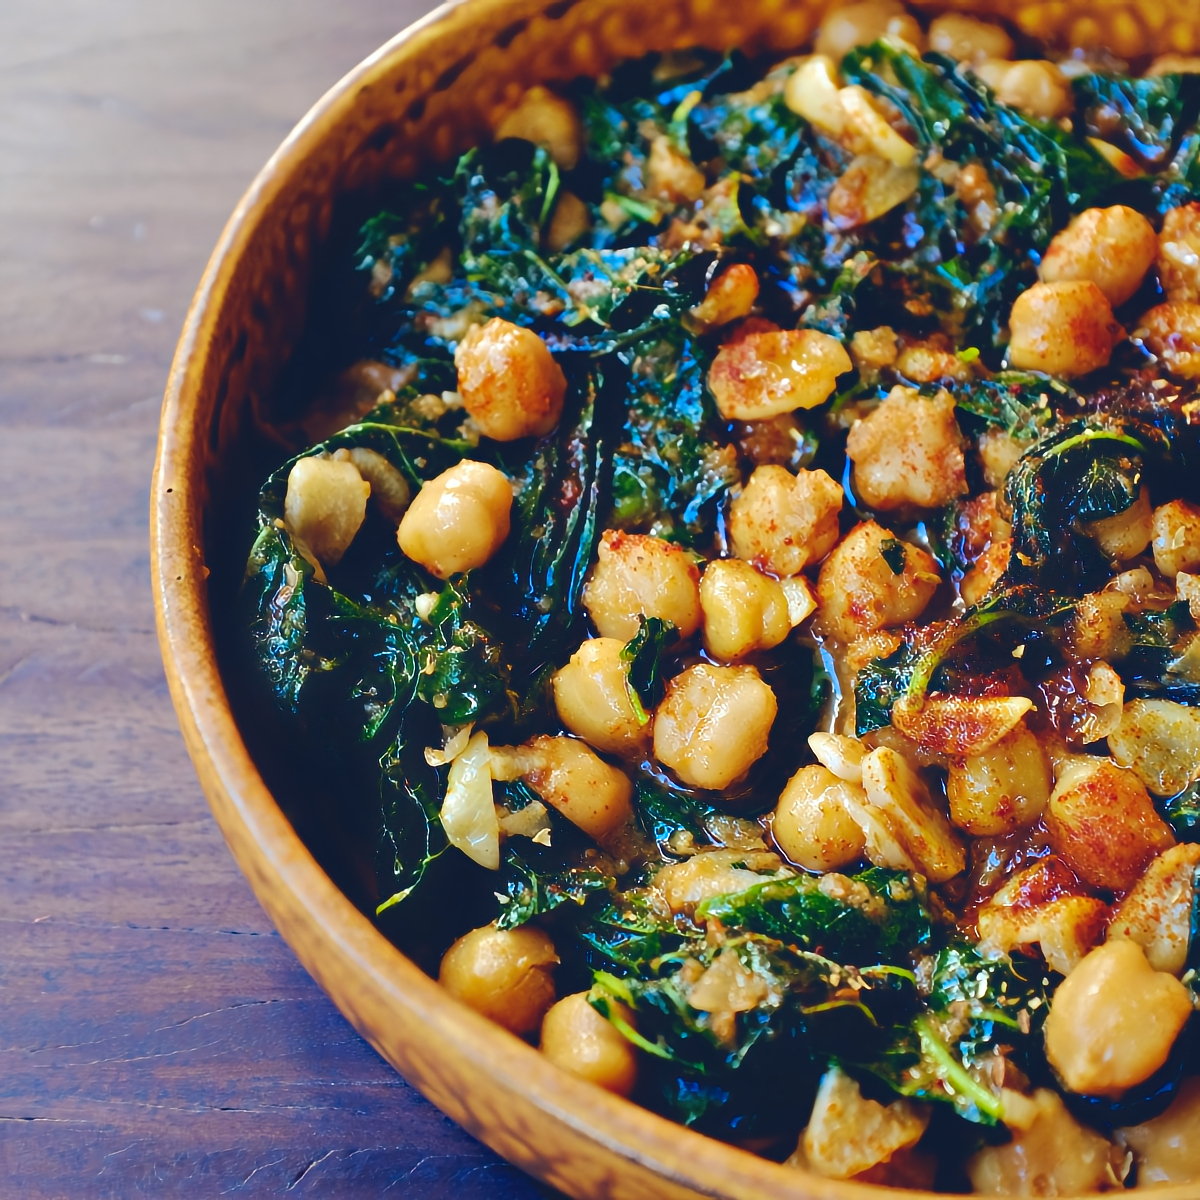 18. Spanish Spinach with Chickpeas